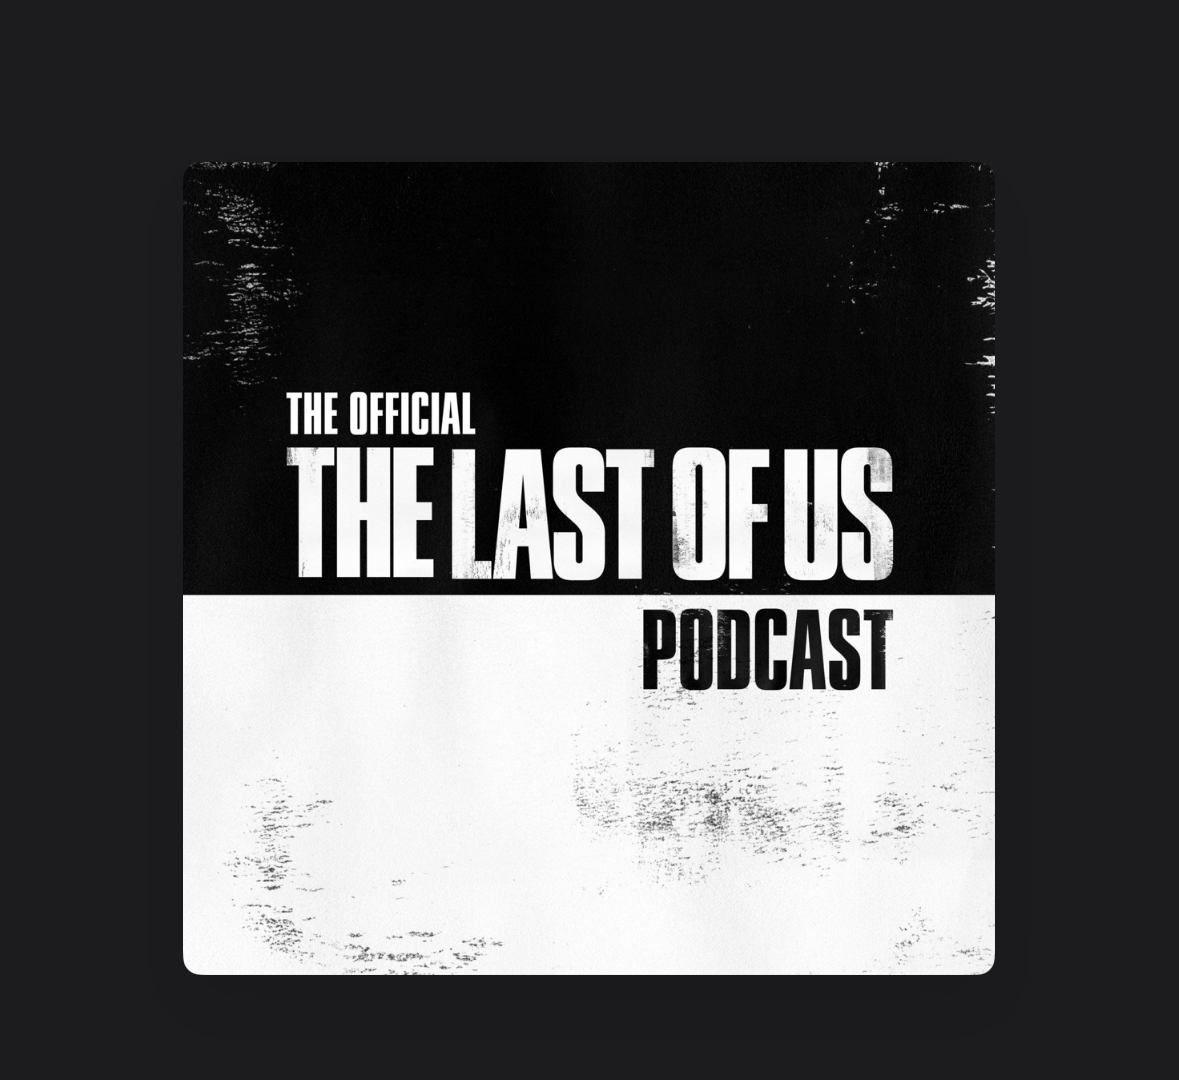 The Official The Last of Us Podcast - Podcast